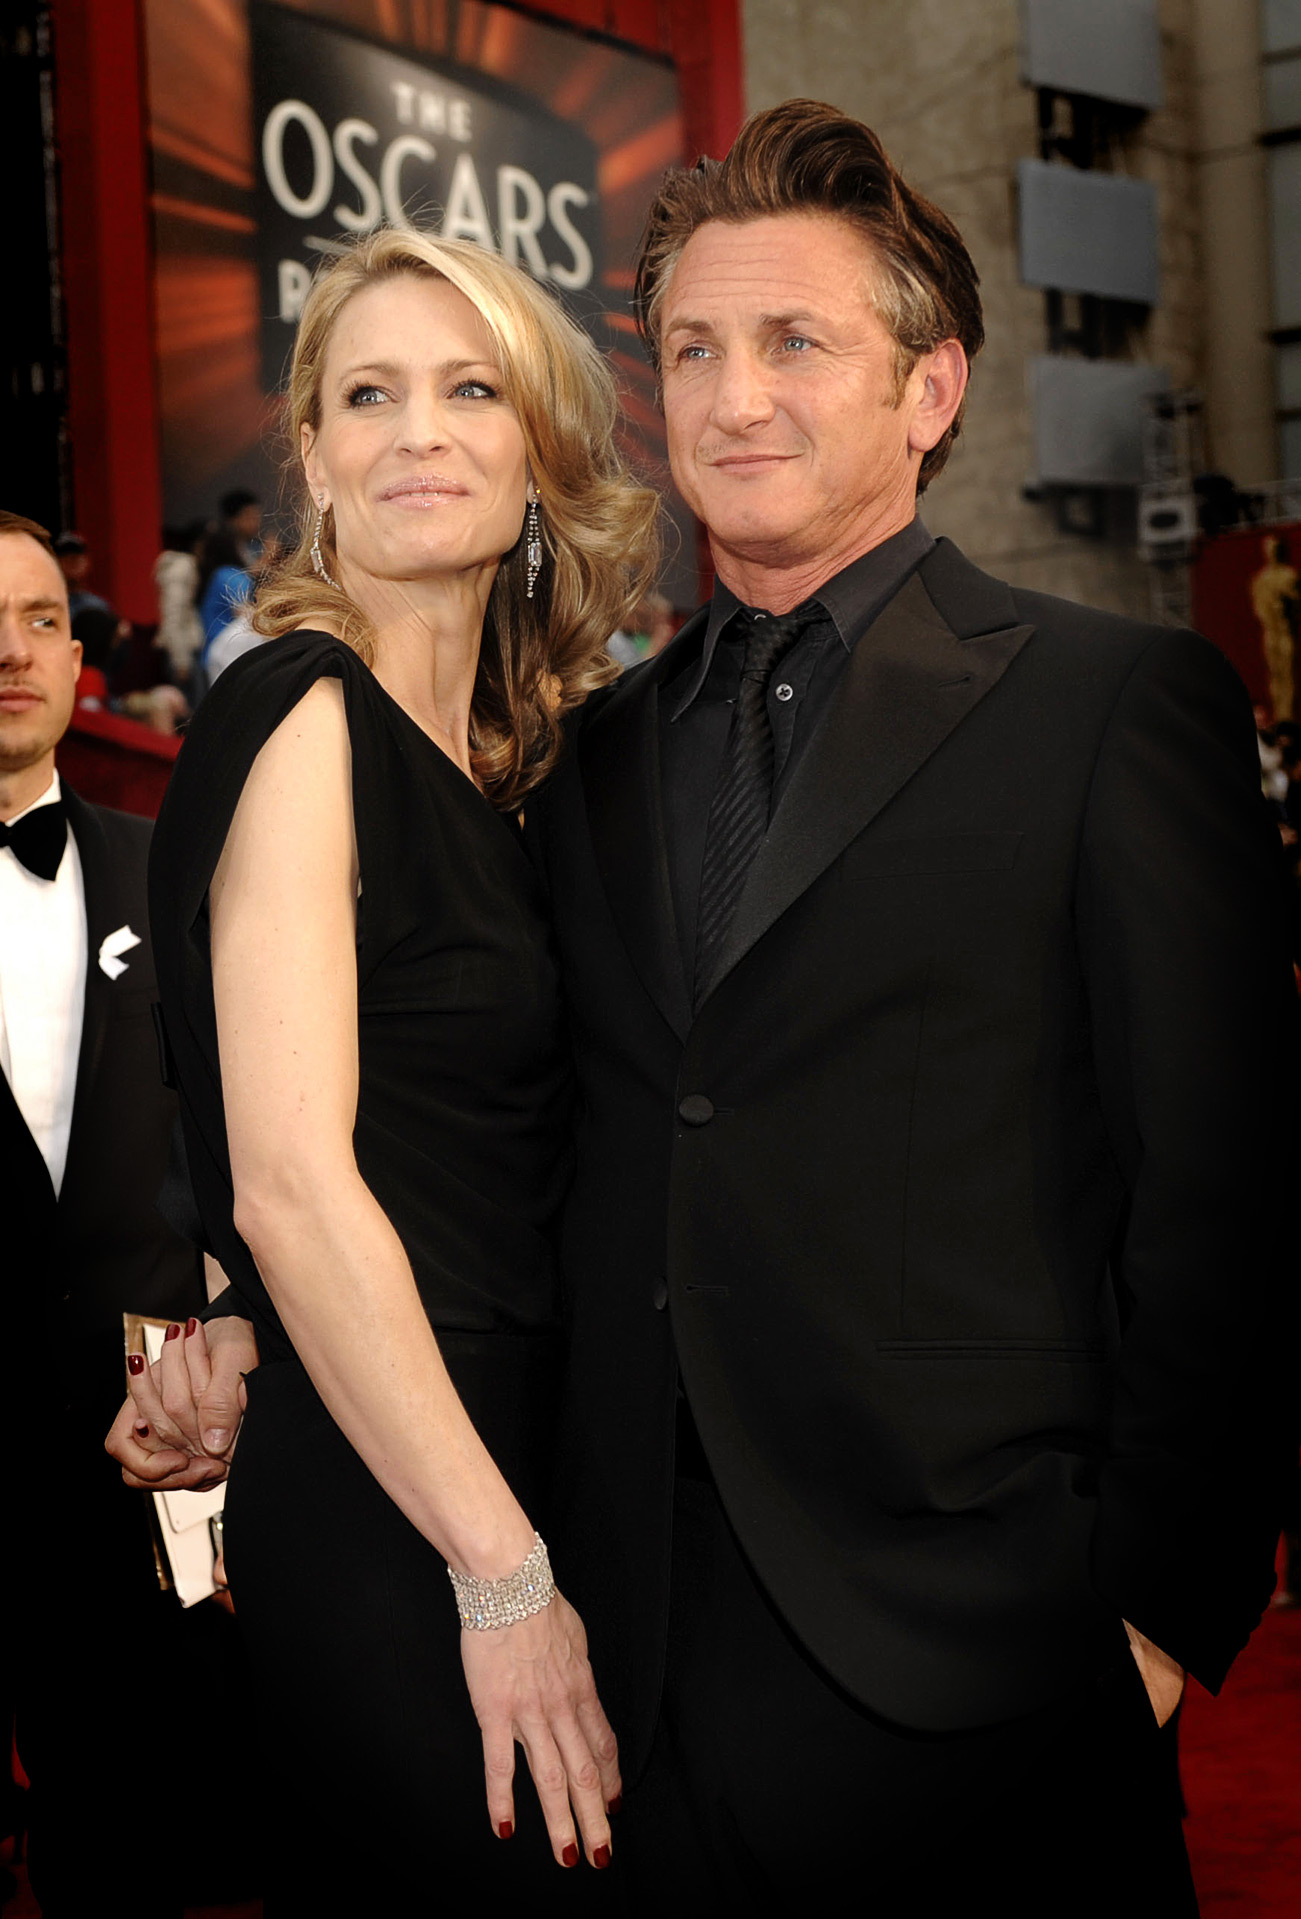 Exes Sean Penn, Robin Wright Spotted Together for 1st Time in Years